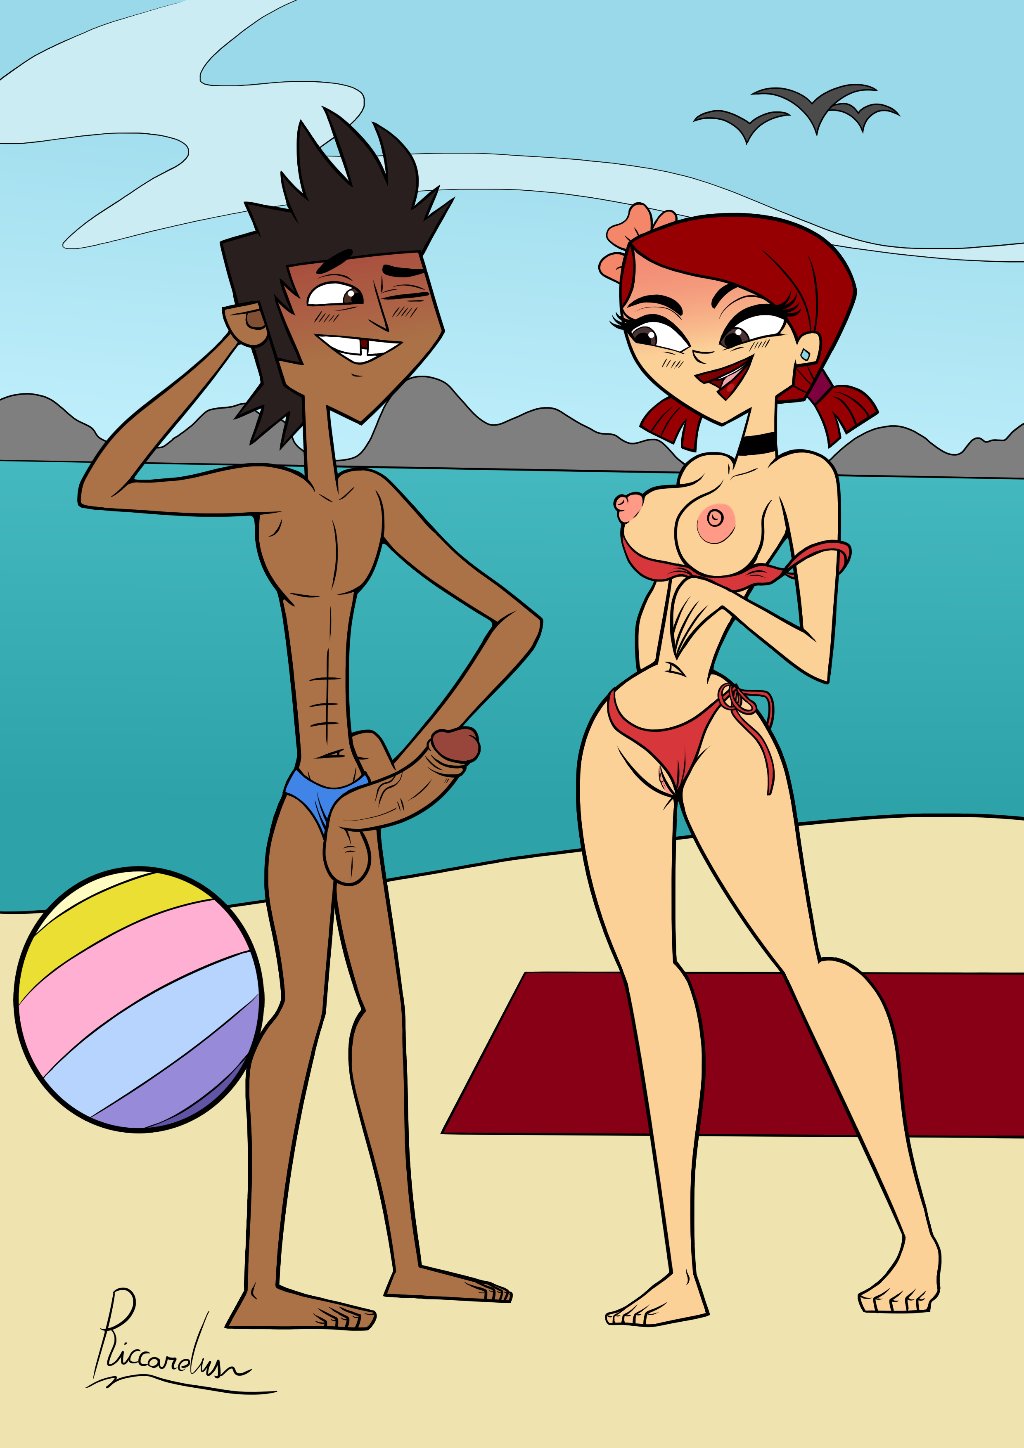 Riccardus97 (Commission open 🔞) on X: Reposting one of my best couple  from Total Drama: Zoey and Mike They're so horny watching each others on  the beach😍 ~ ❤️+🔁 #totaldramaisland #totaldrama #TD #